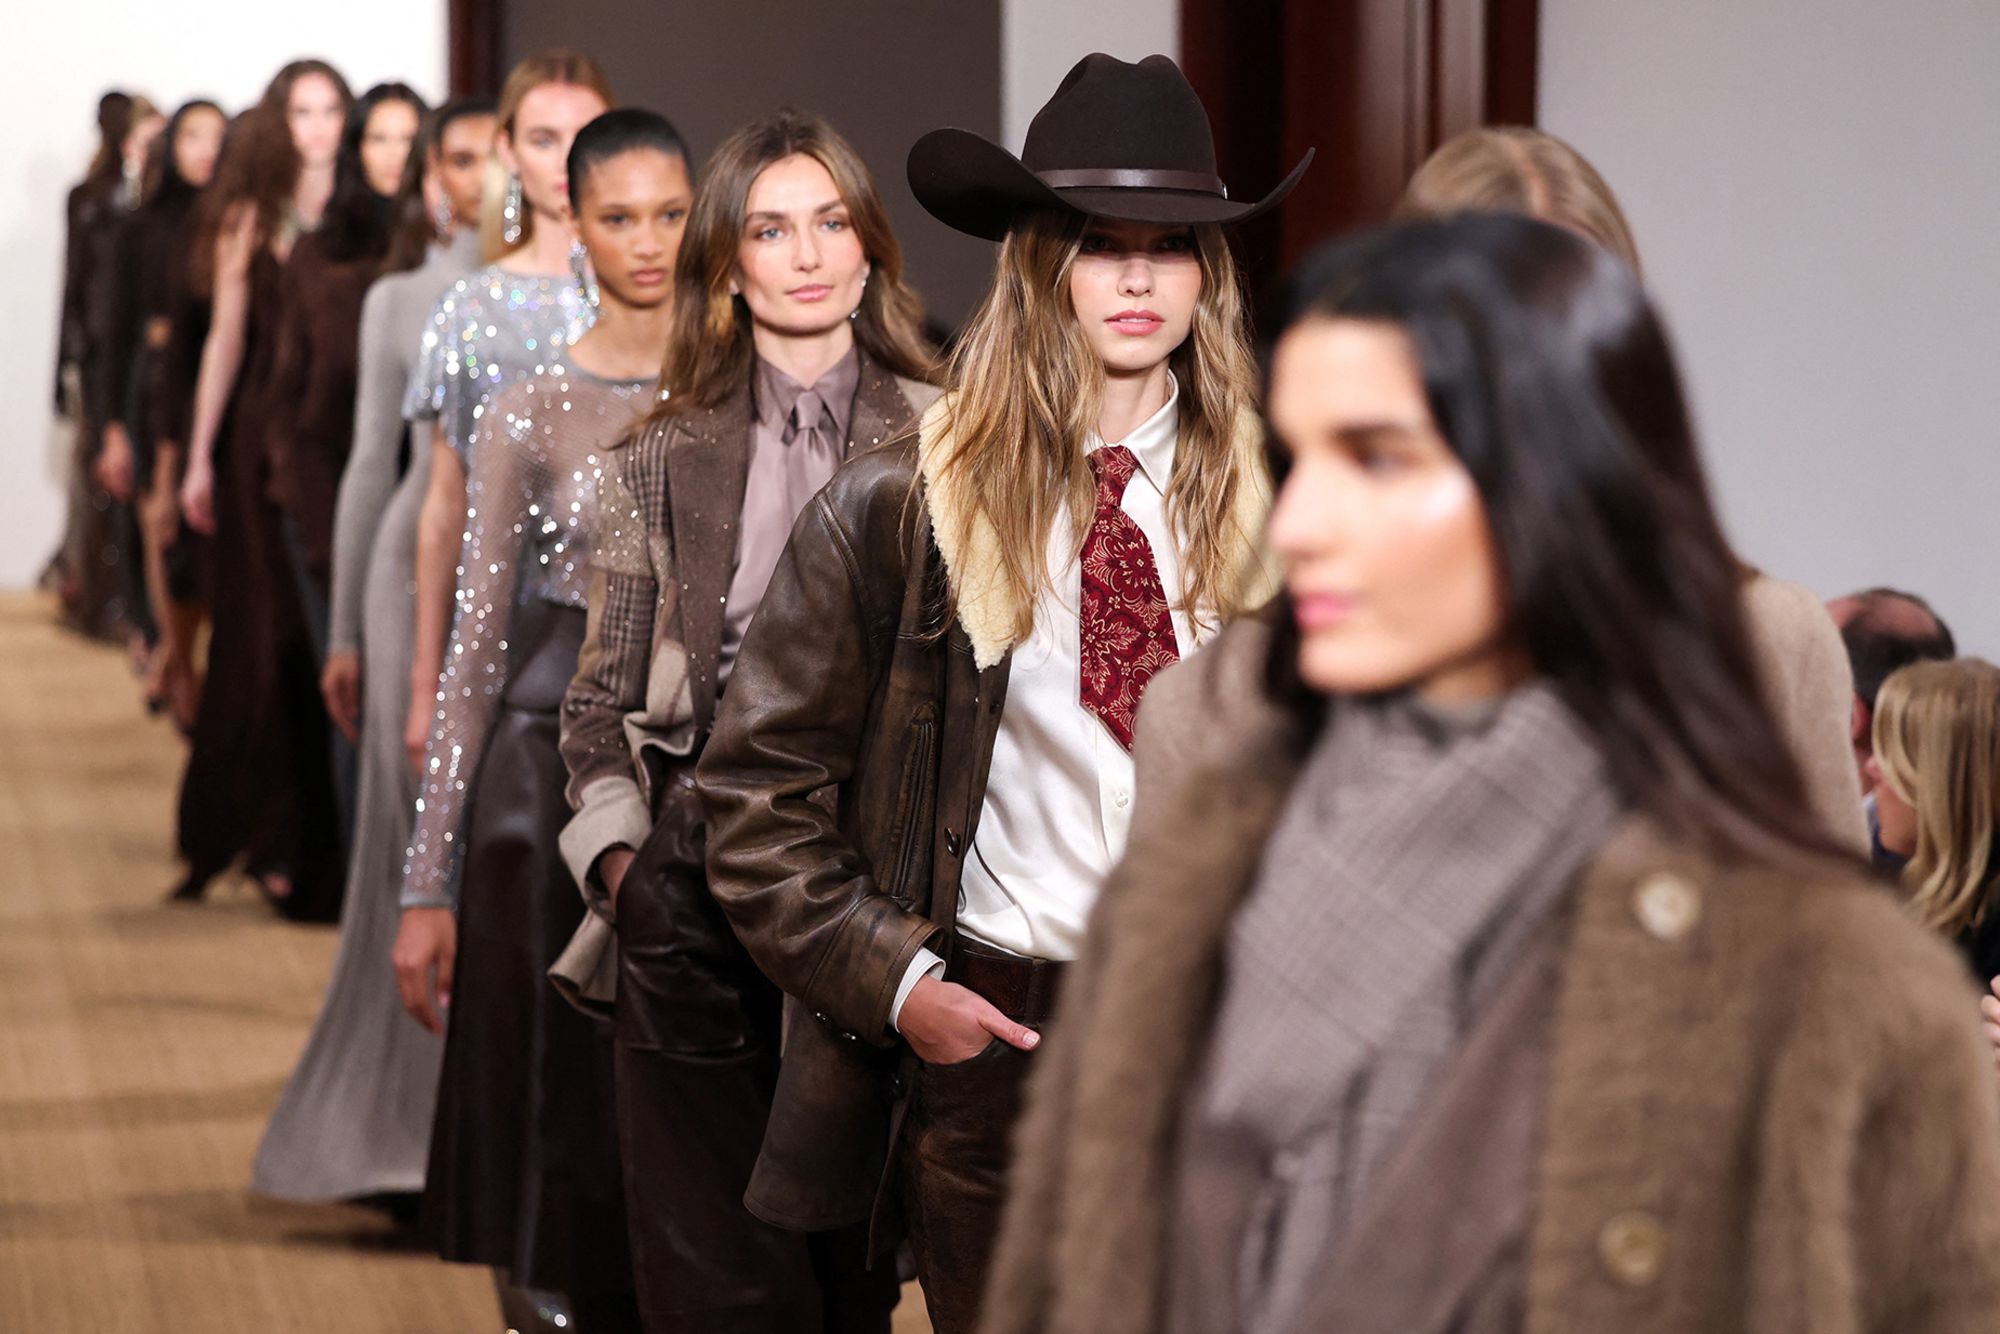 "Tailored and trim suit jackets, draped knits, suede and leather separates, and bias-cut gowns are a nod to Ralph Lauren’s most personal inspirations," the fashion label said of its latest collection in a statement.